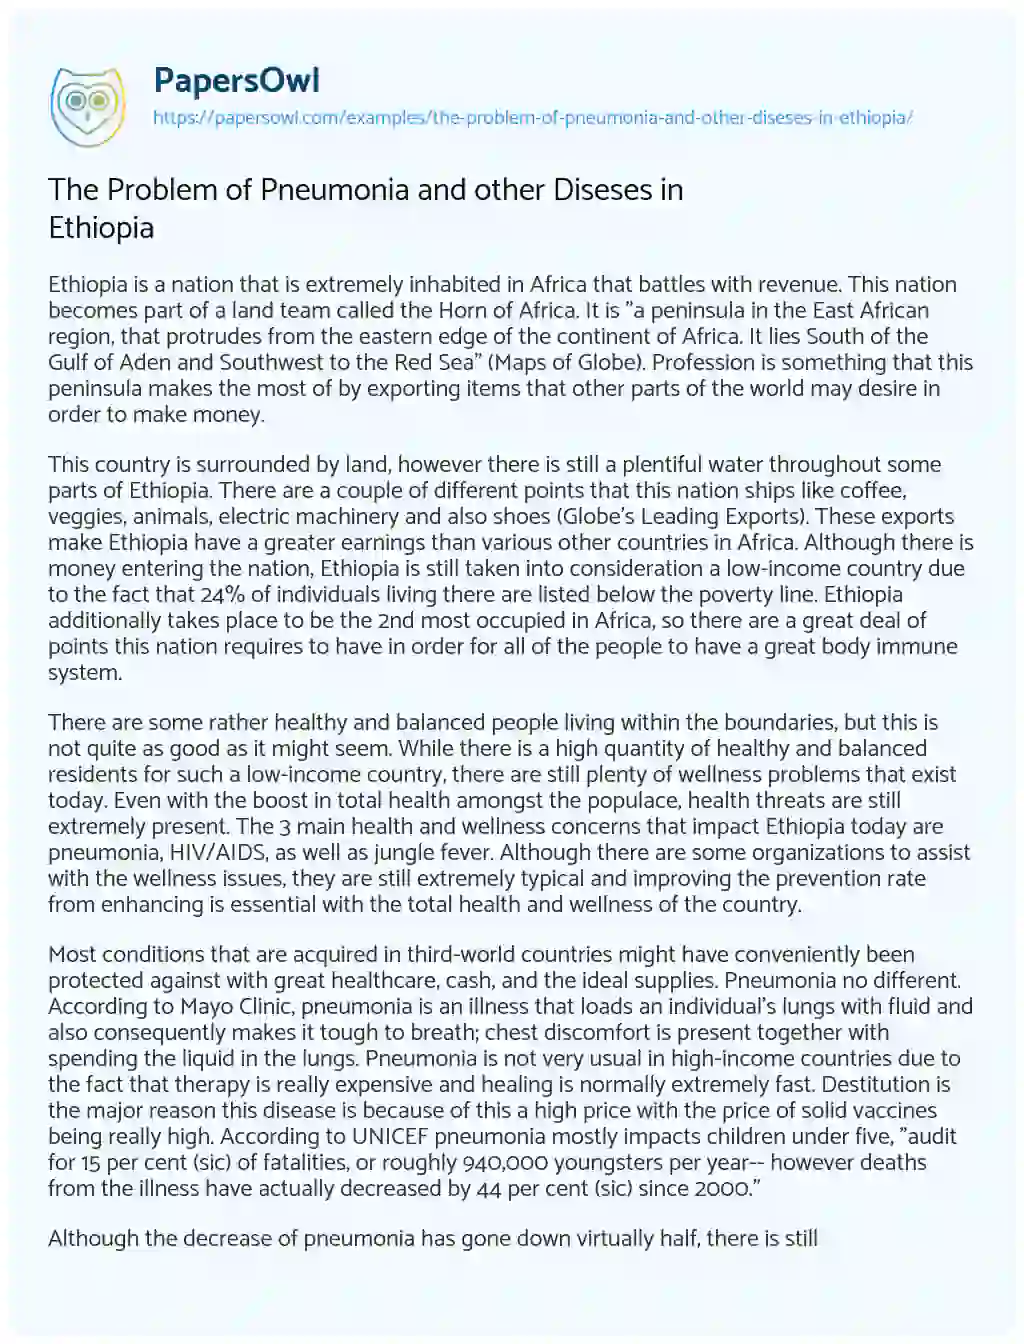 The Problem of Pneumonia and other Diseses in Ethiopia essay